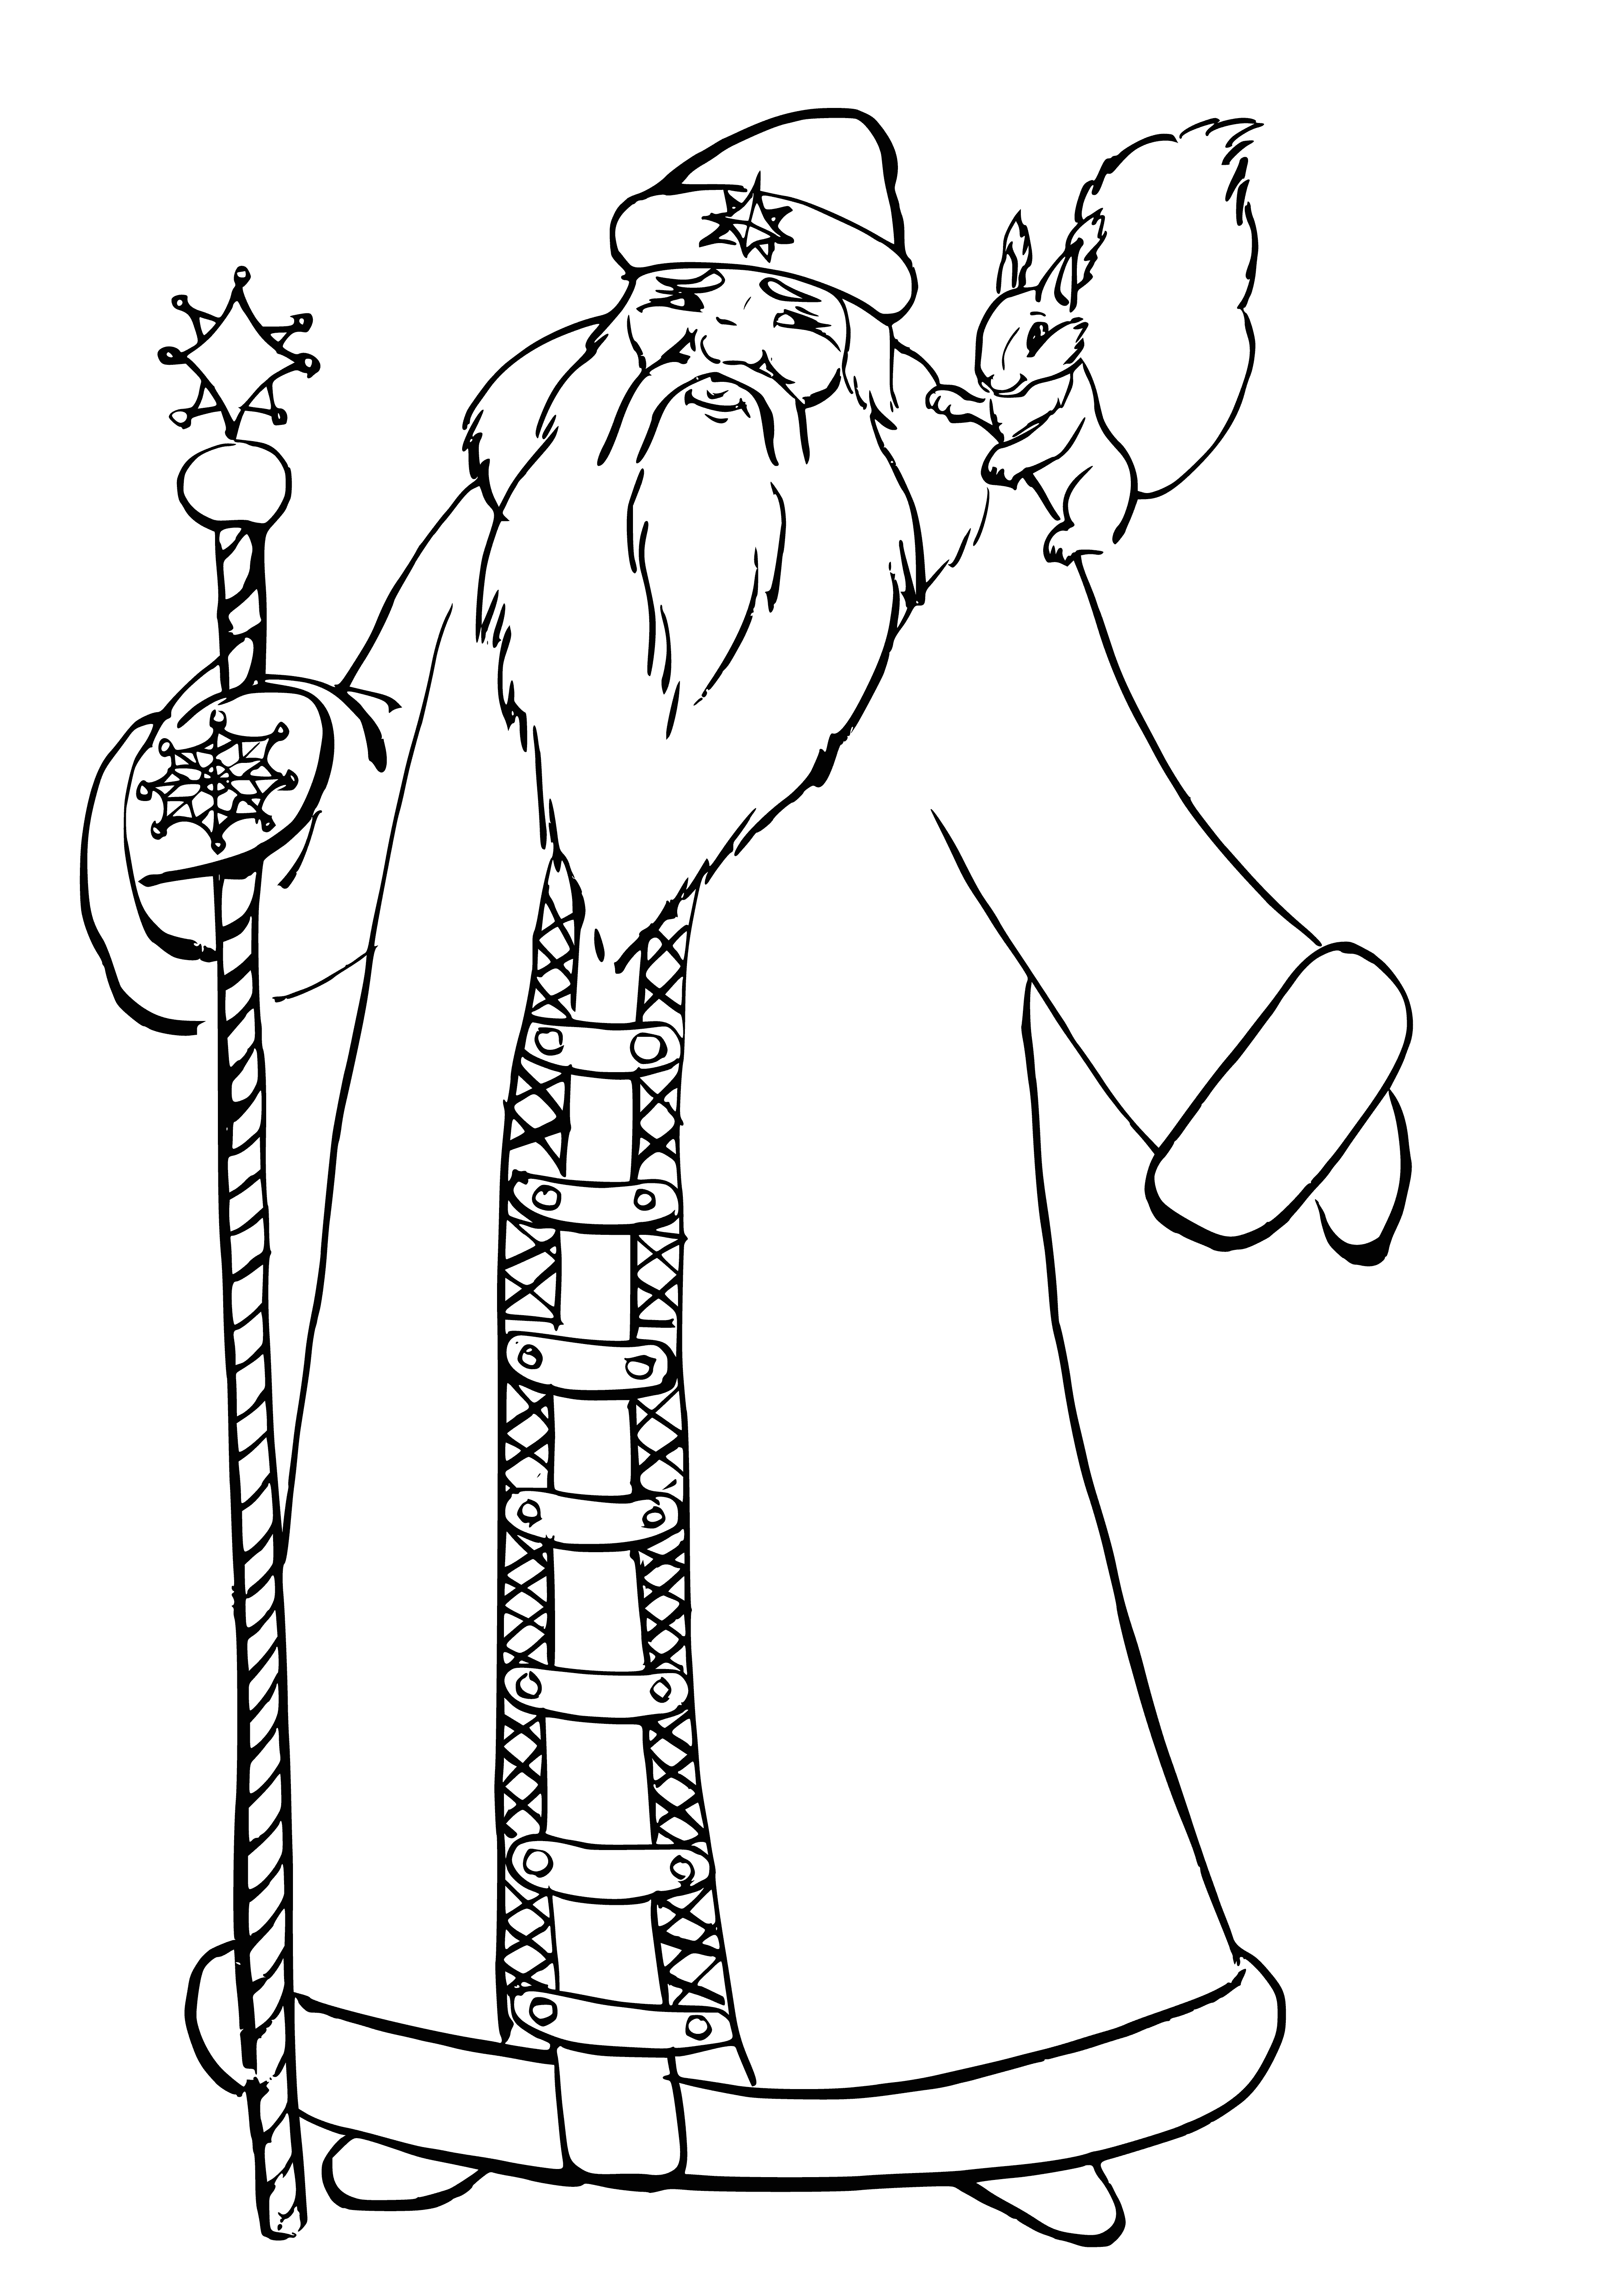 coloring page: Jolly old man in red suit with white fur, gifts over shoulder, standing in front of a fireplace filled with Xmas decorations.